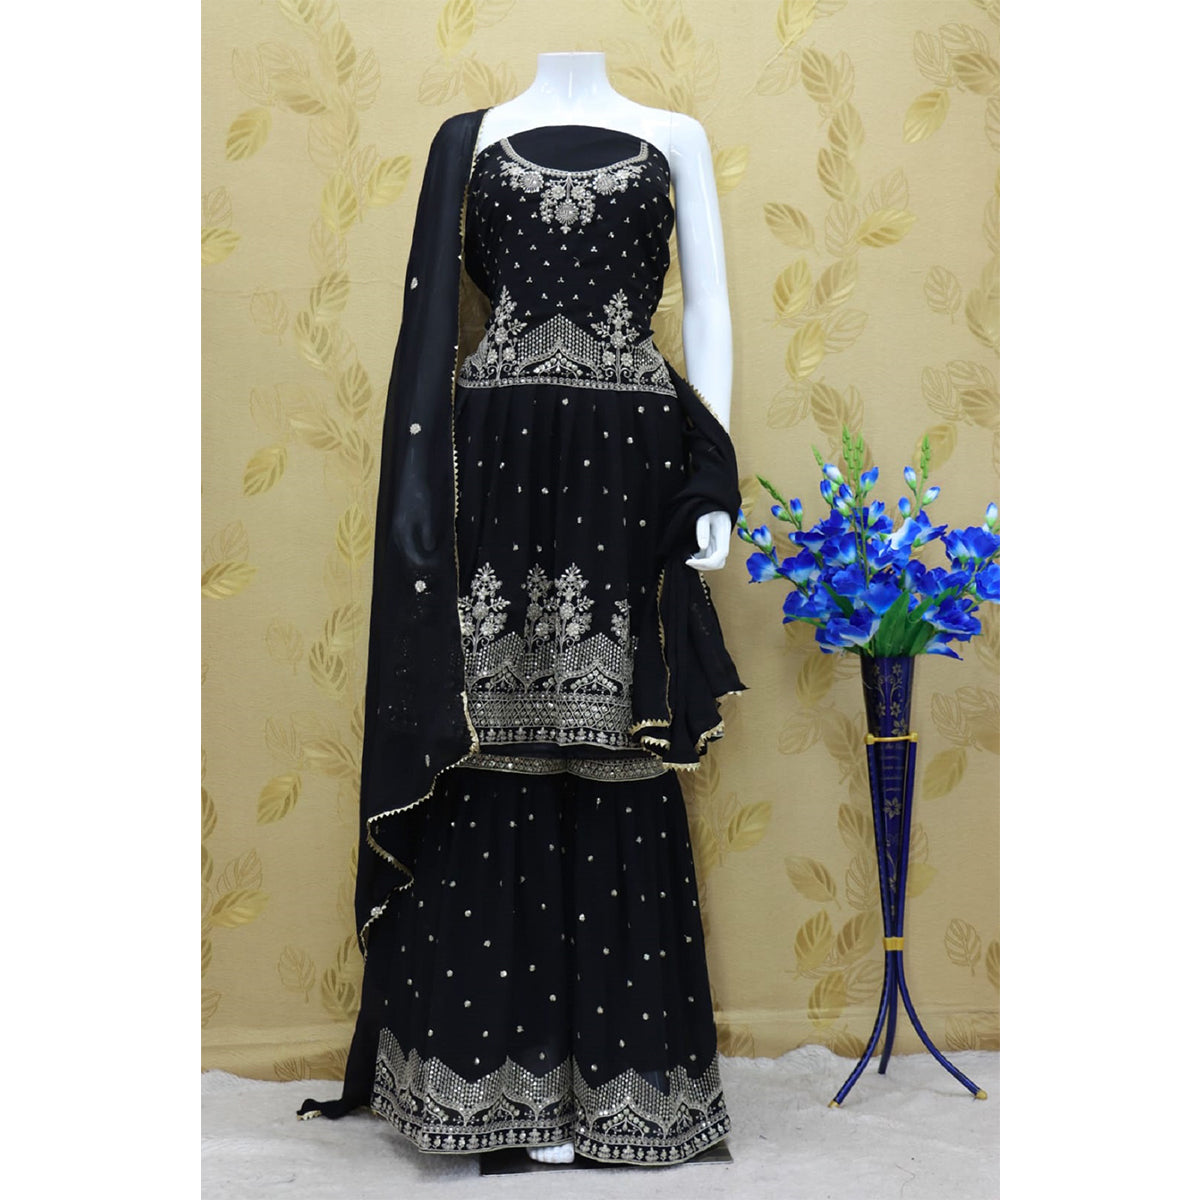 Shafnufab Heavy Faux Georgette Semi Stitched Plazzo Suit In Black COLOR